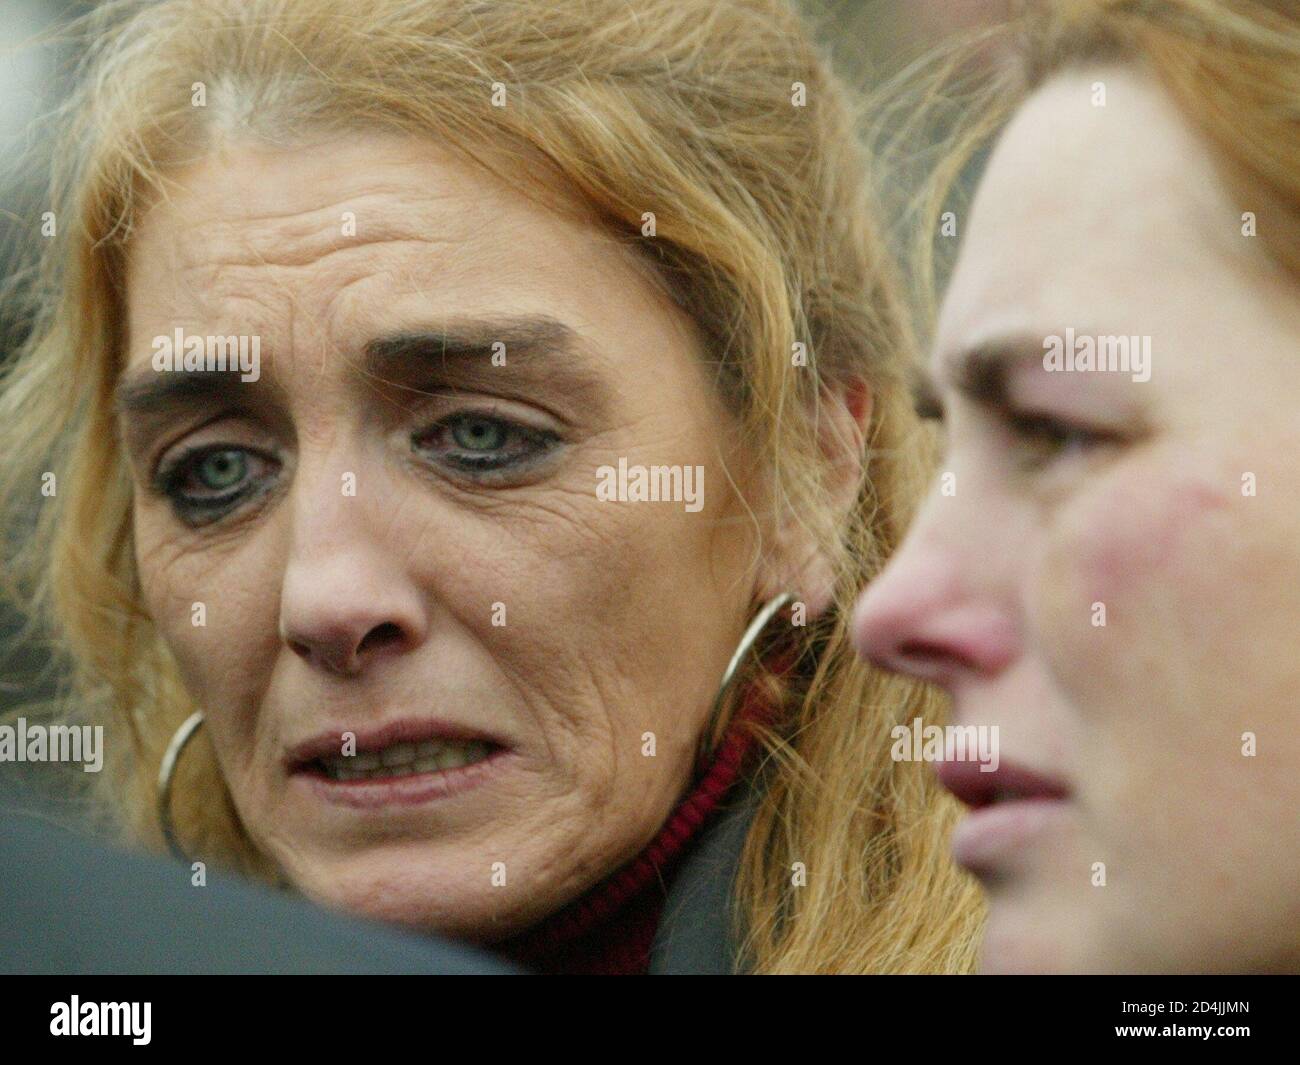 AGNES MCCONVILLE DAUGHTER OF MURDERED BELFAST WOMAN JEAN MCCONVILLE ATTENDS  HER MOTHERS FUNERAL IN WEST BELFAST Stock Photo - Alamy